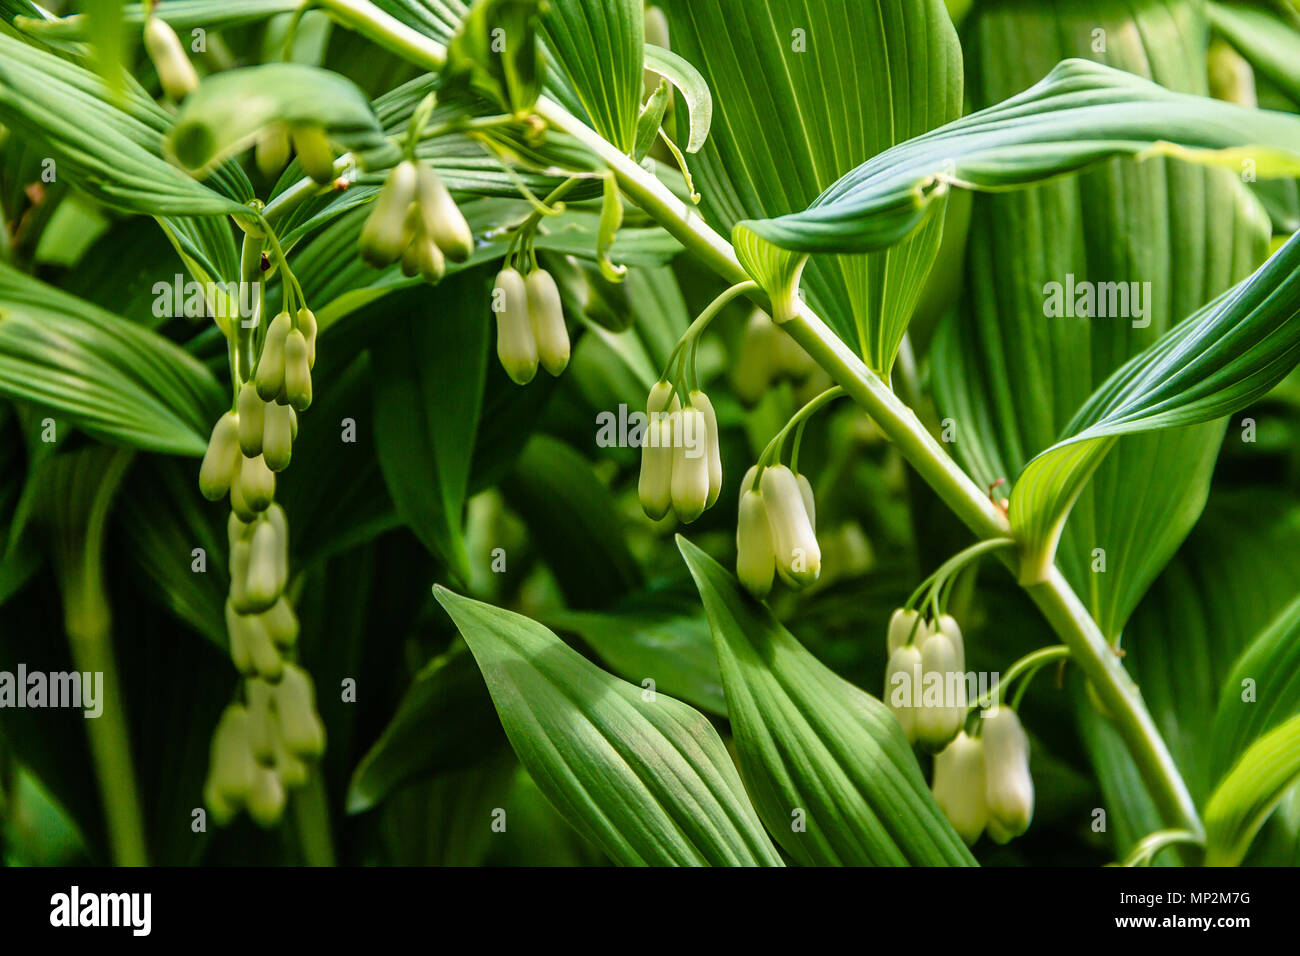 Polygonatum or Common Solomon's Seal, a traditional cottage garden plant with white bells and broad green leaves. Northumberland, UK. May 2018. Stock Photo